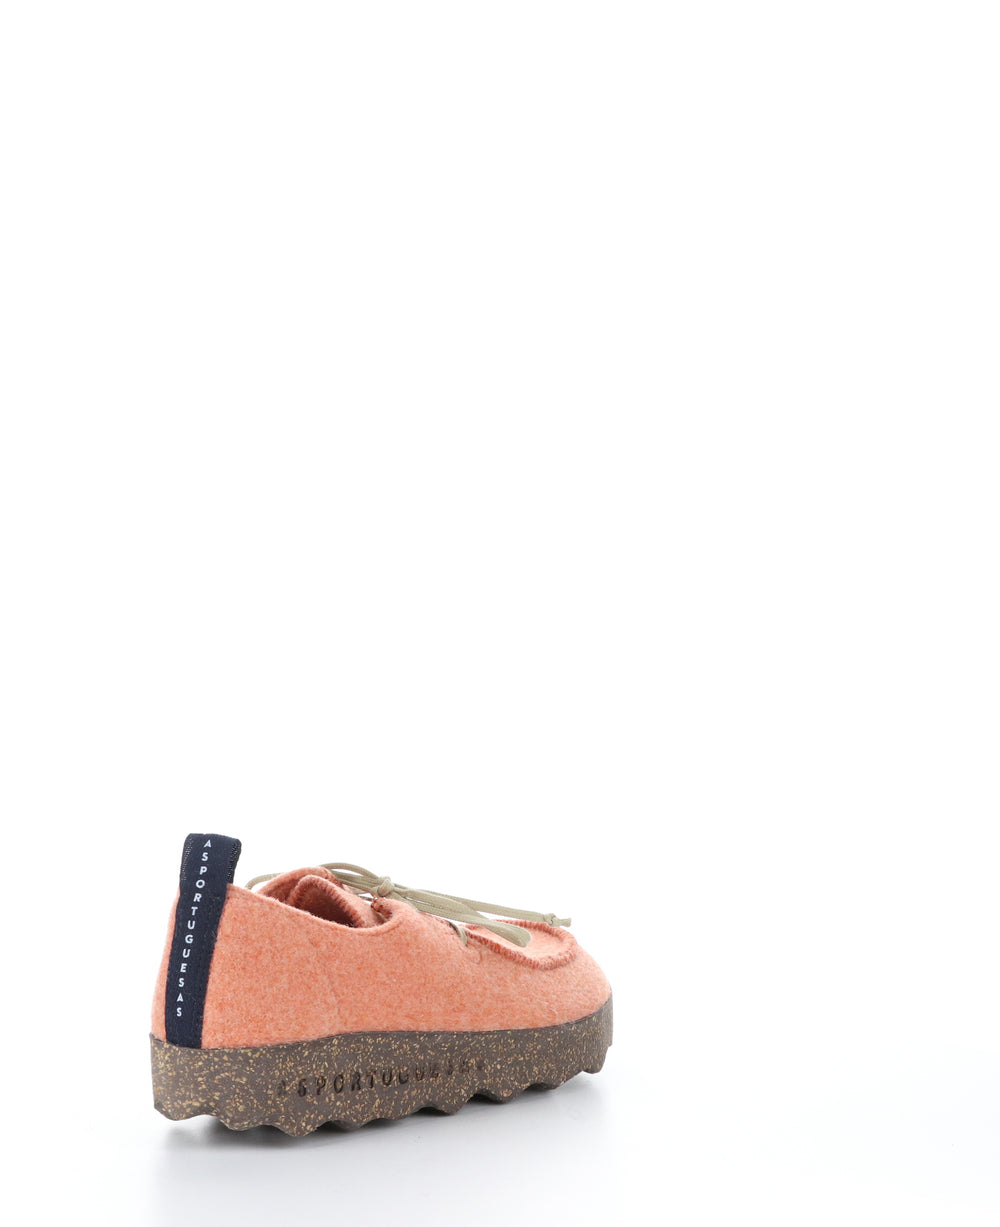 CHAT063ASP Tangerine Round Toe Shoes|CHAT063ASP Chaussures à Bout Rond in Orange